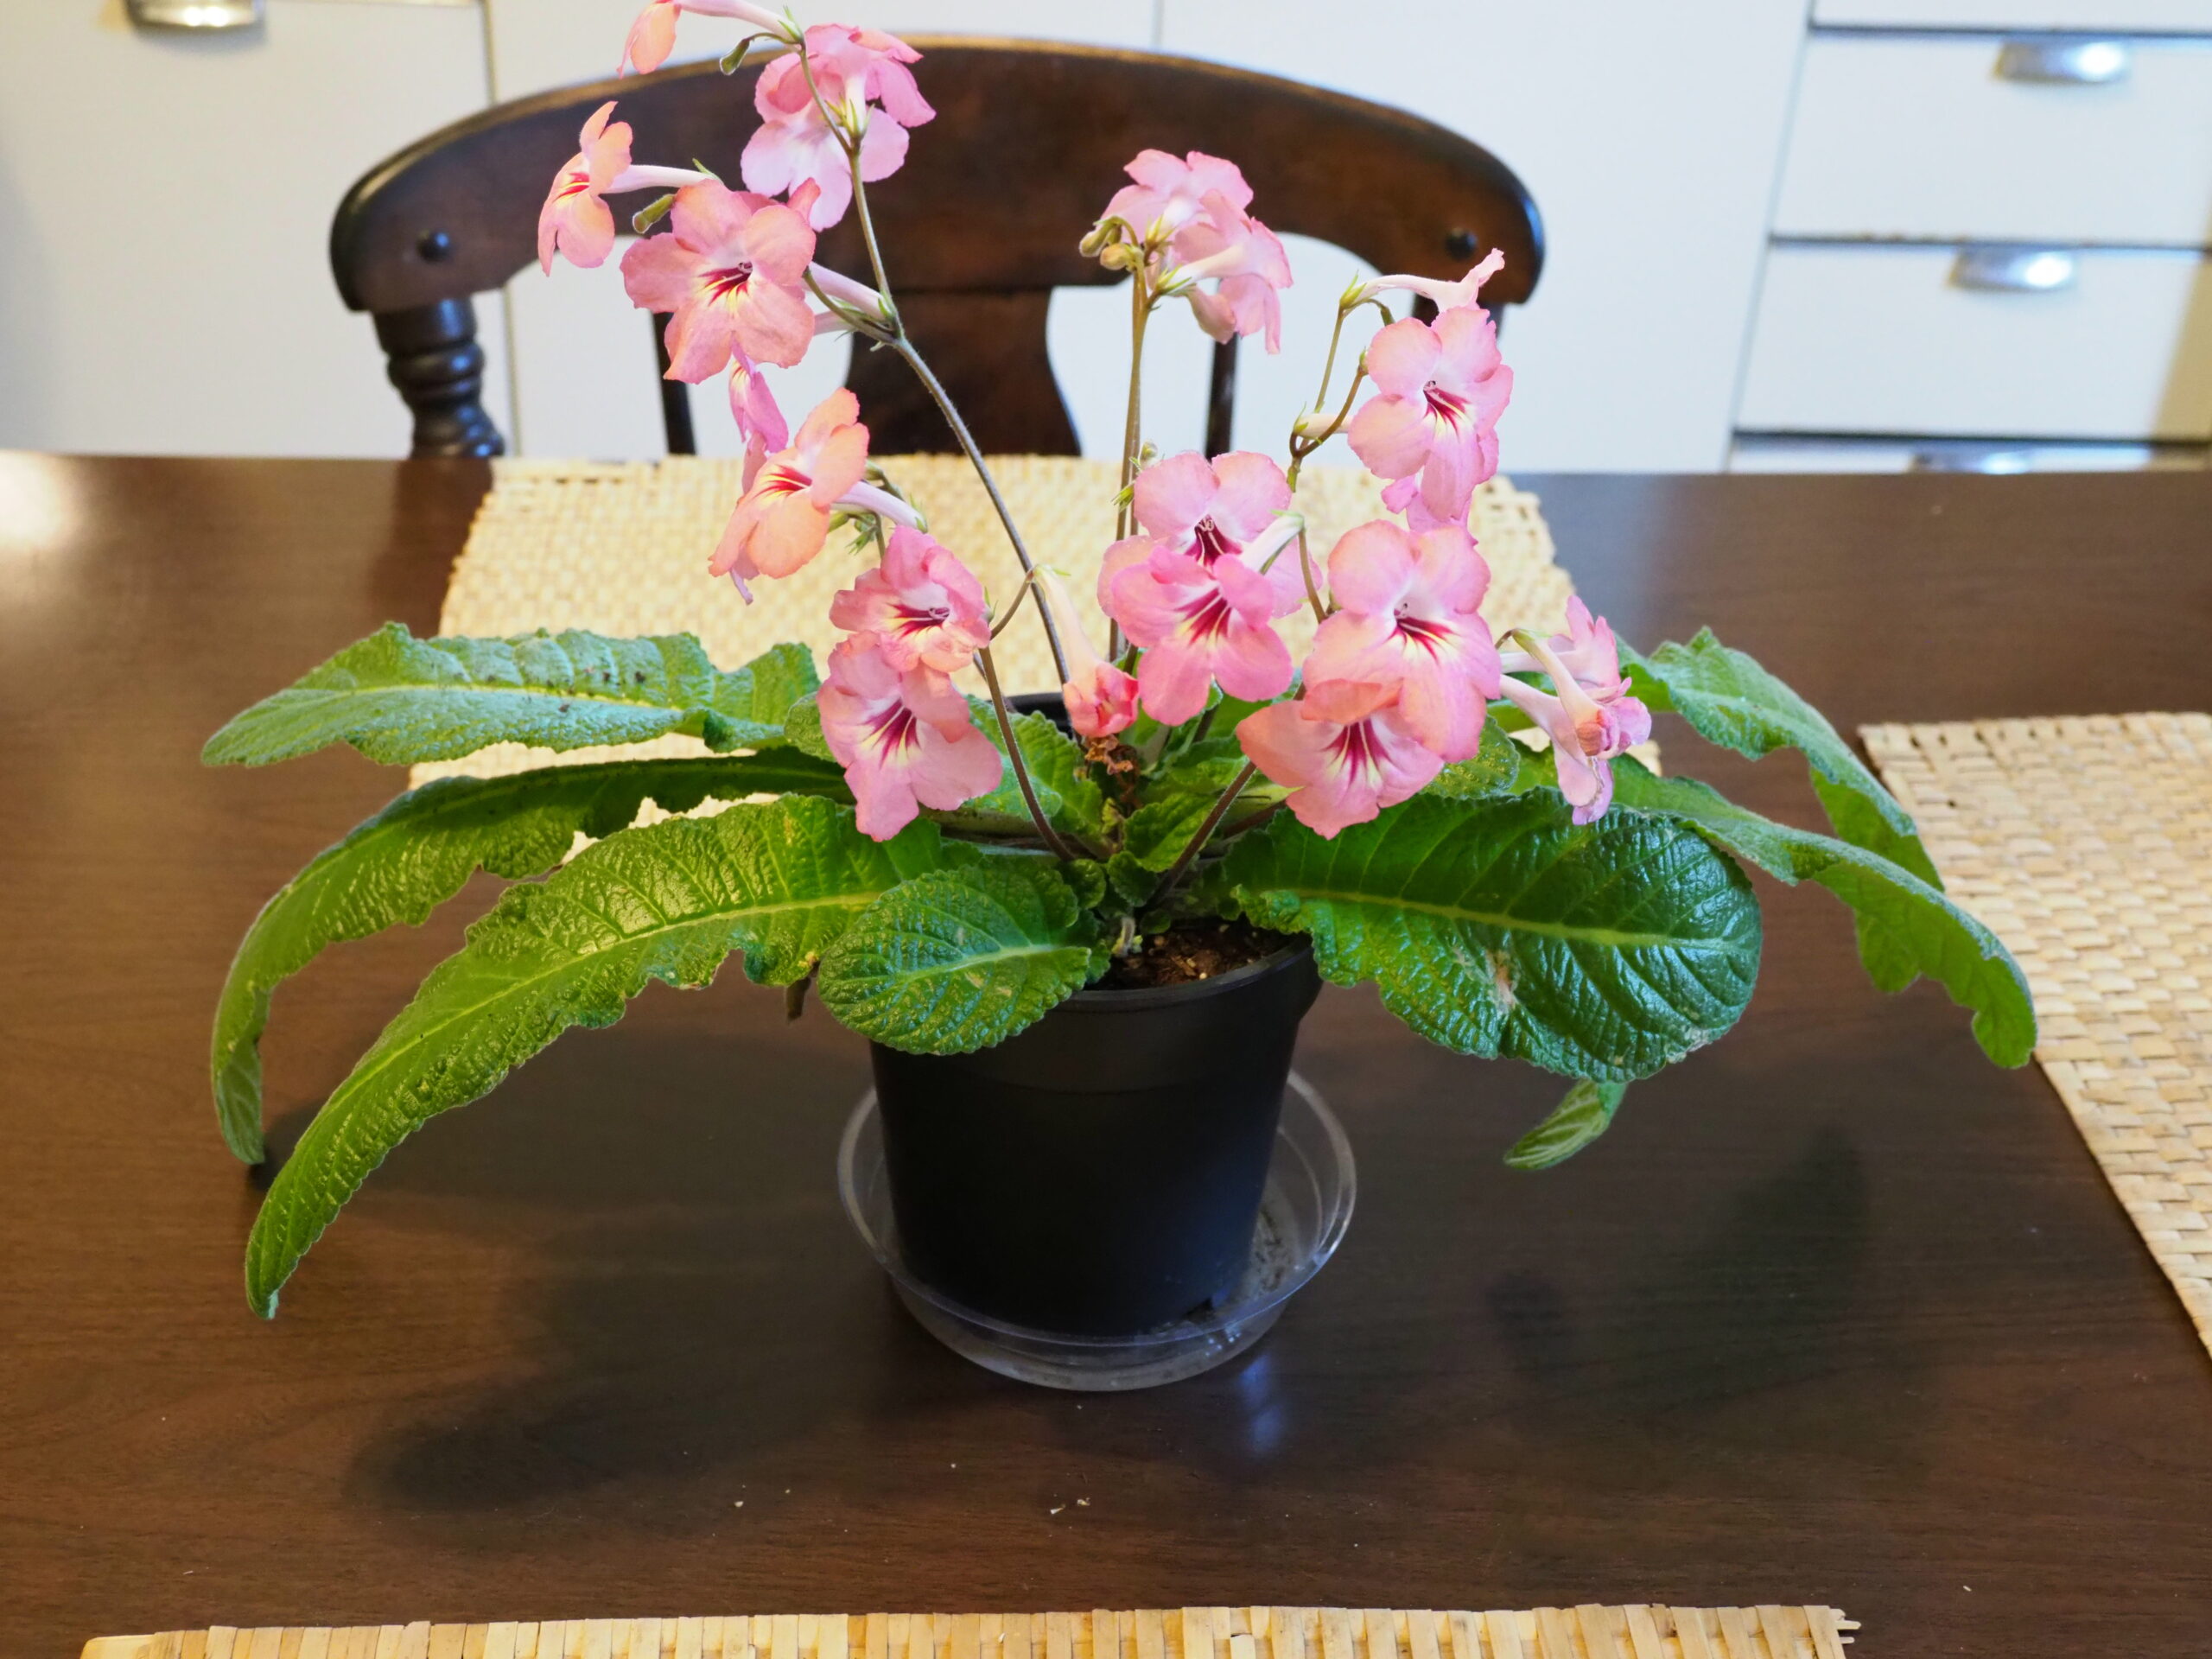 This is a Streptocarpus, or Cape primrose. They’re hard to find these days but make great houseplants. Flower colors are pink, red and blue with some bicolors and doubles available.  ANDREW MESSINGER